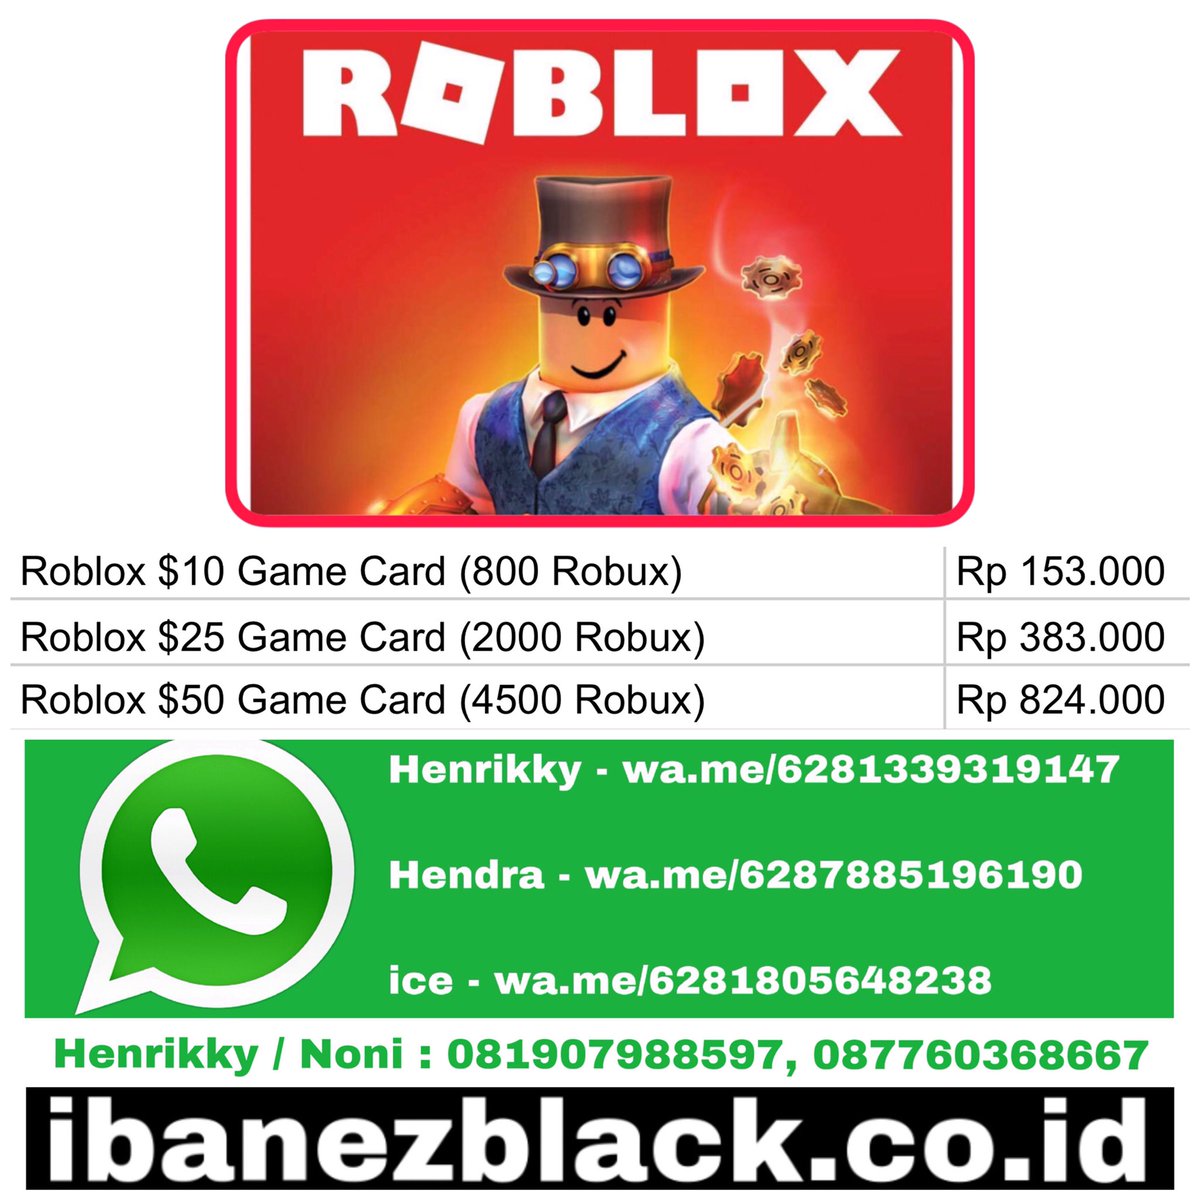 Ibanezblack Com On Twitter Roblox Game Card Robux Https T Co